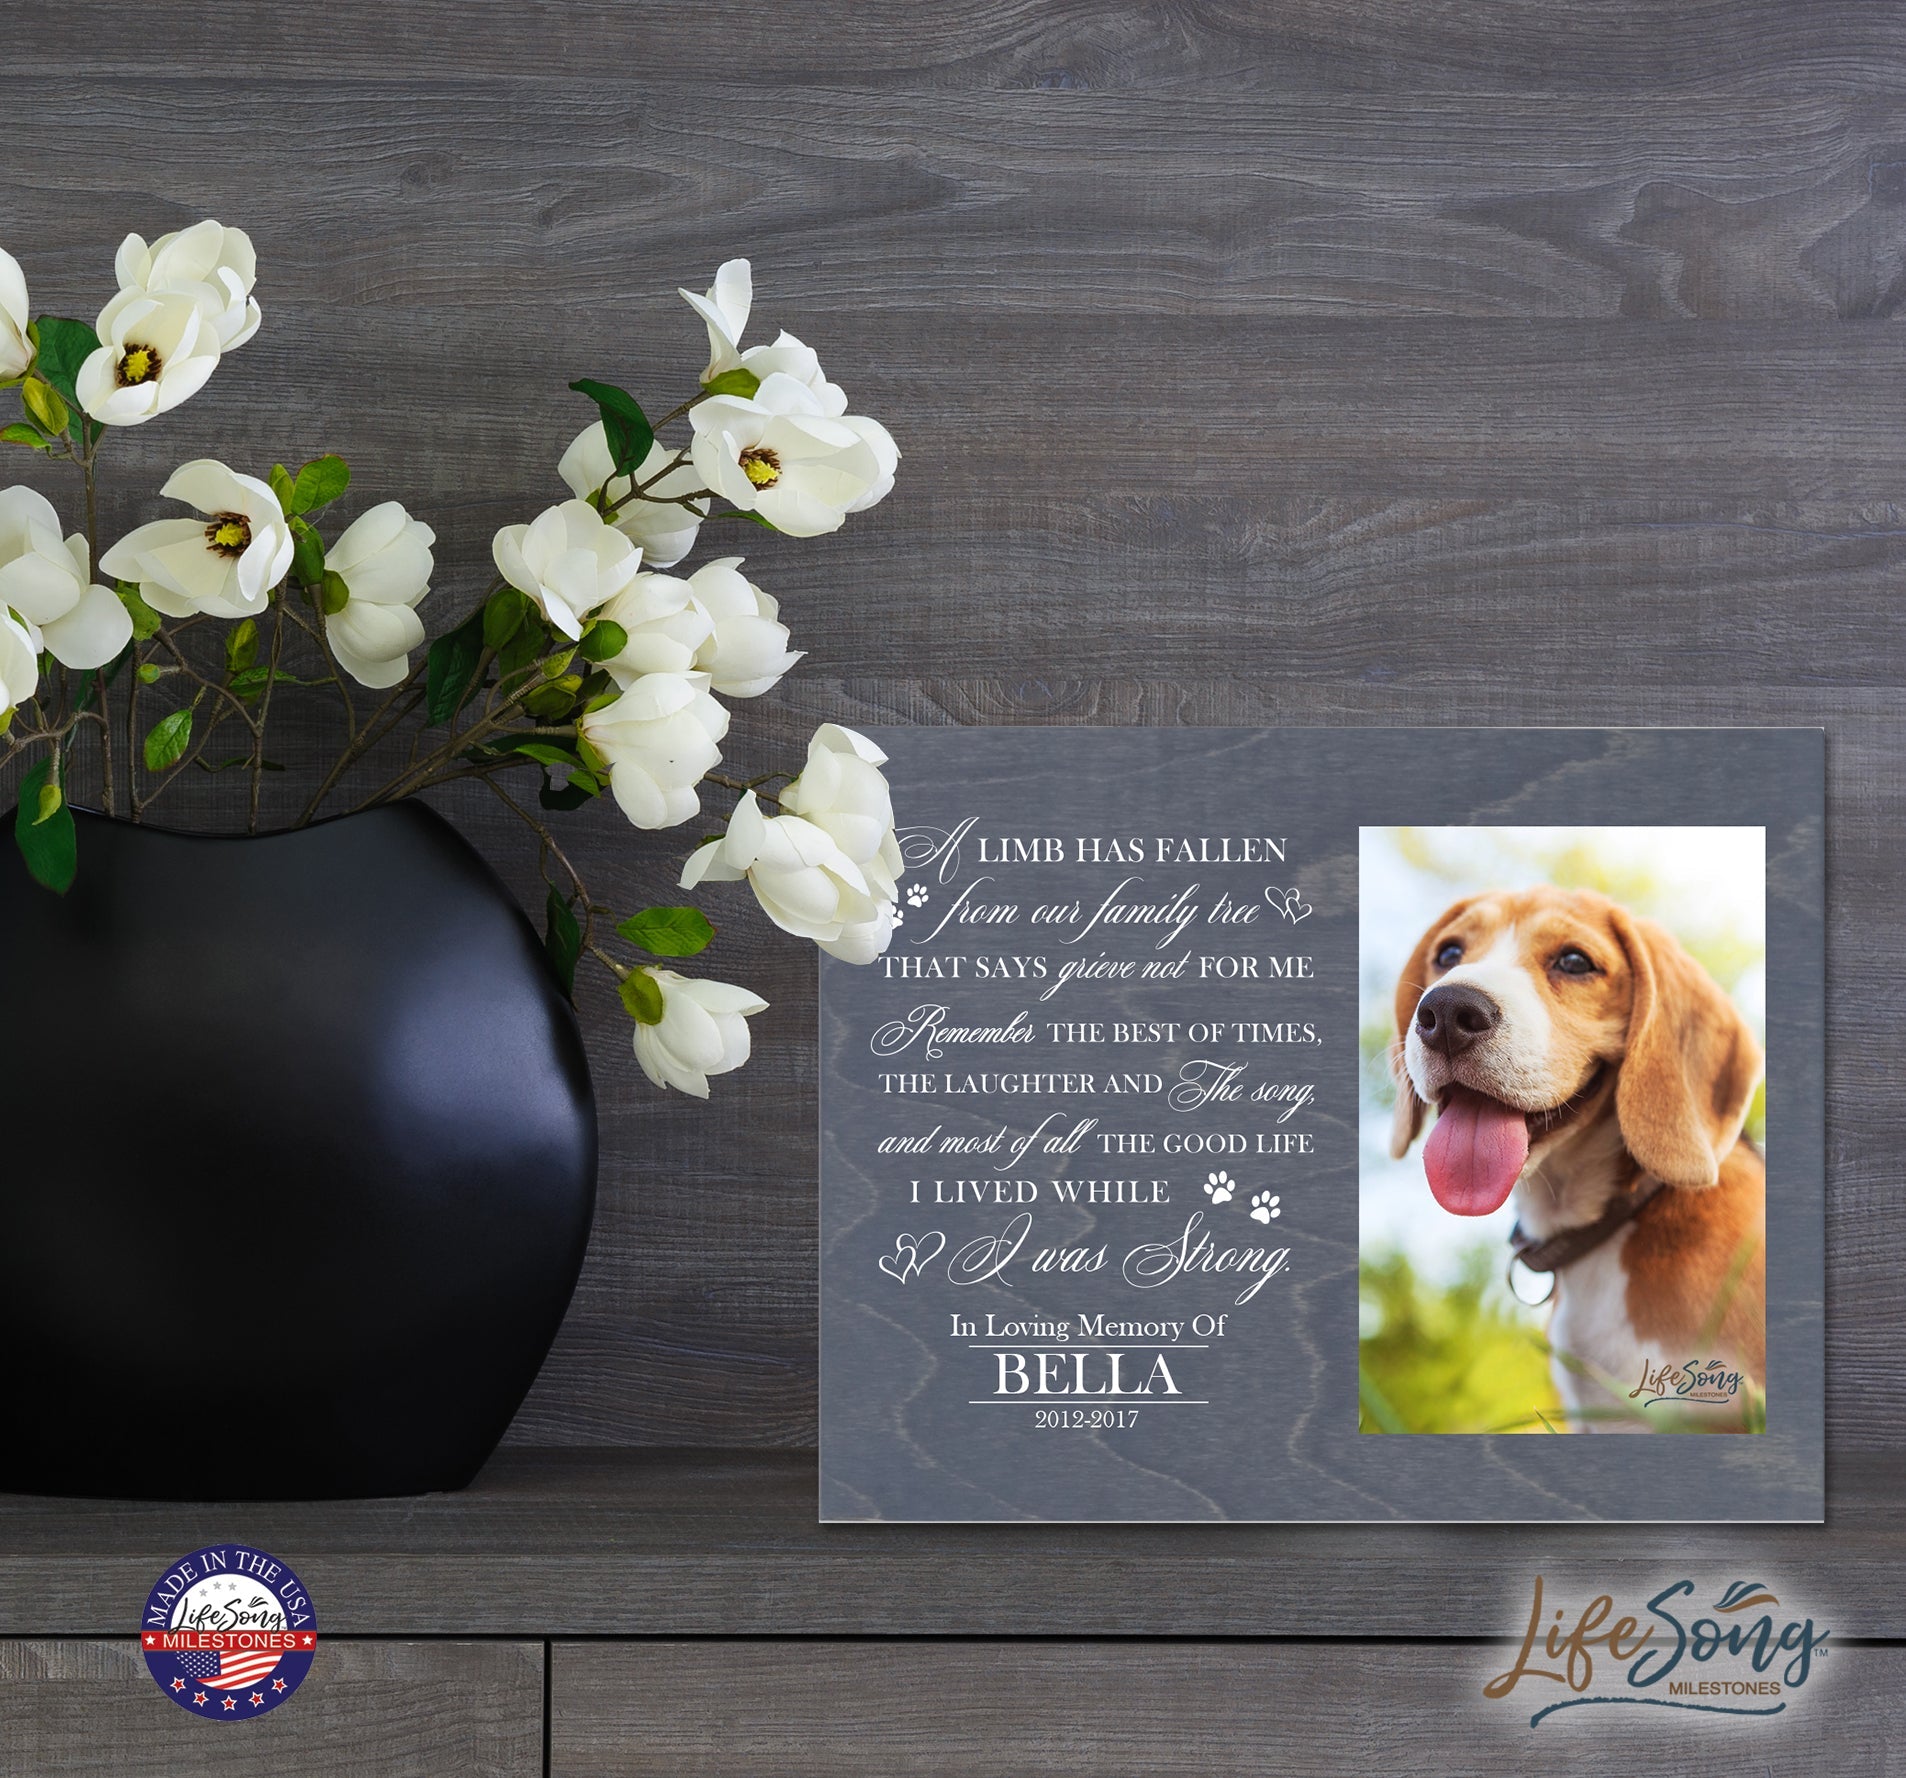 Pet Memorial Photo Wall Plaque Décor - A Limb Has Fallen From Our Family Tree